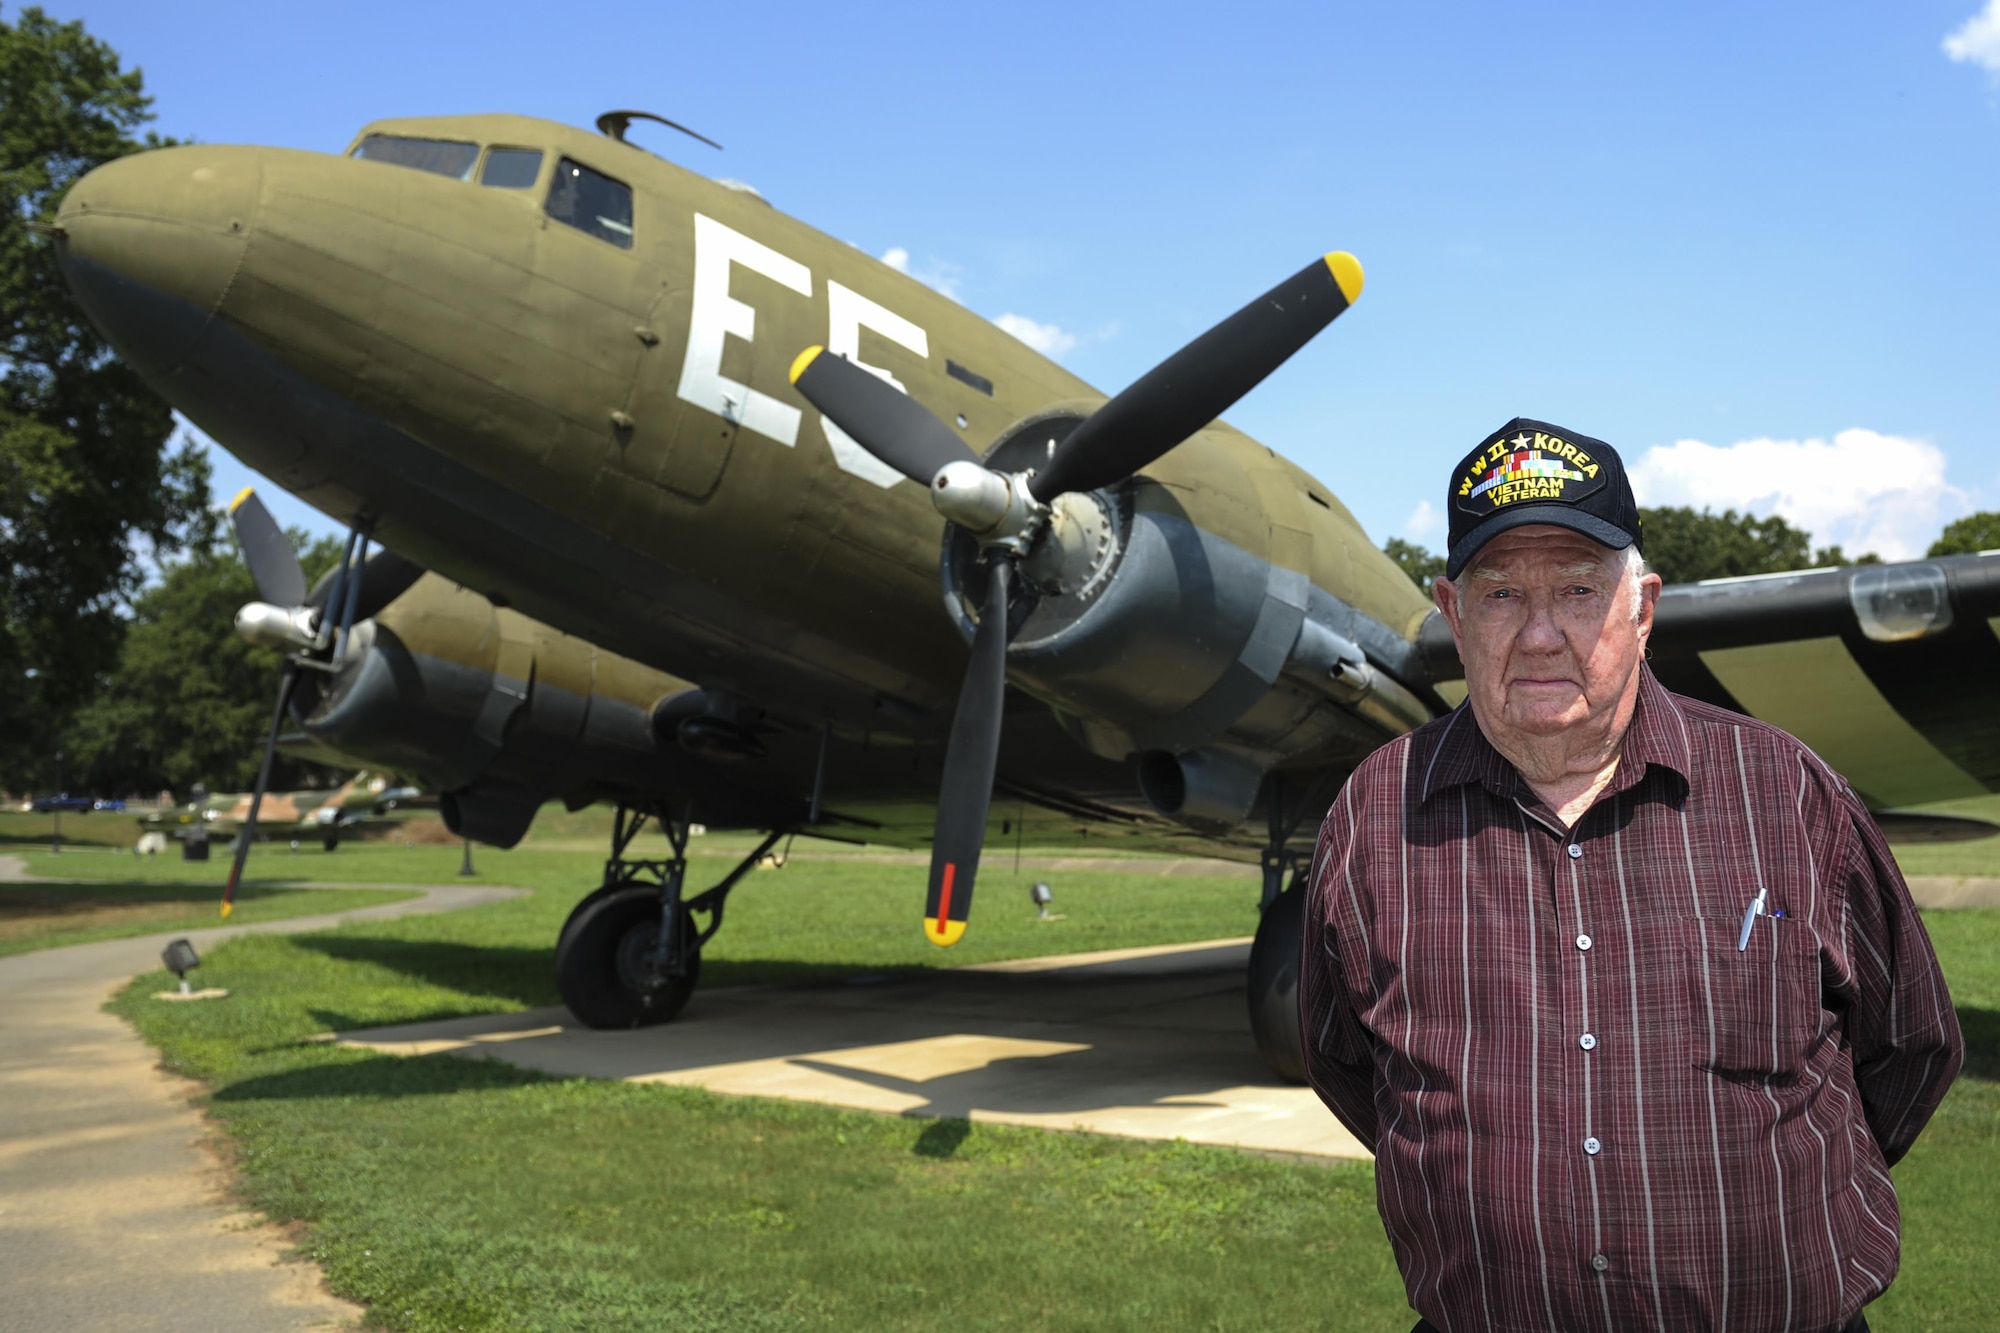 Ret. U.S. Air Force Master Sgt. Robert Earl "Sam" Puckett served in three wars. During World War II, Puckett partook in the Berlin Airlift conducted by aircraft similar to the C-47 pictured above. (U.S. Air Force photo/Senior Airman Harry Brexel)